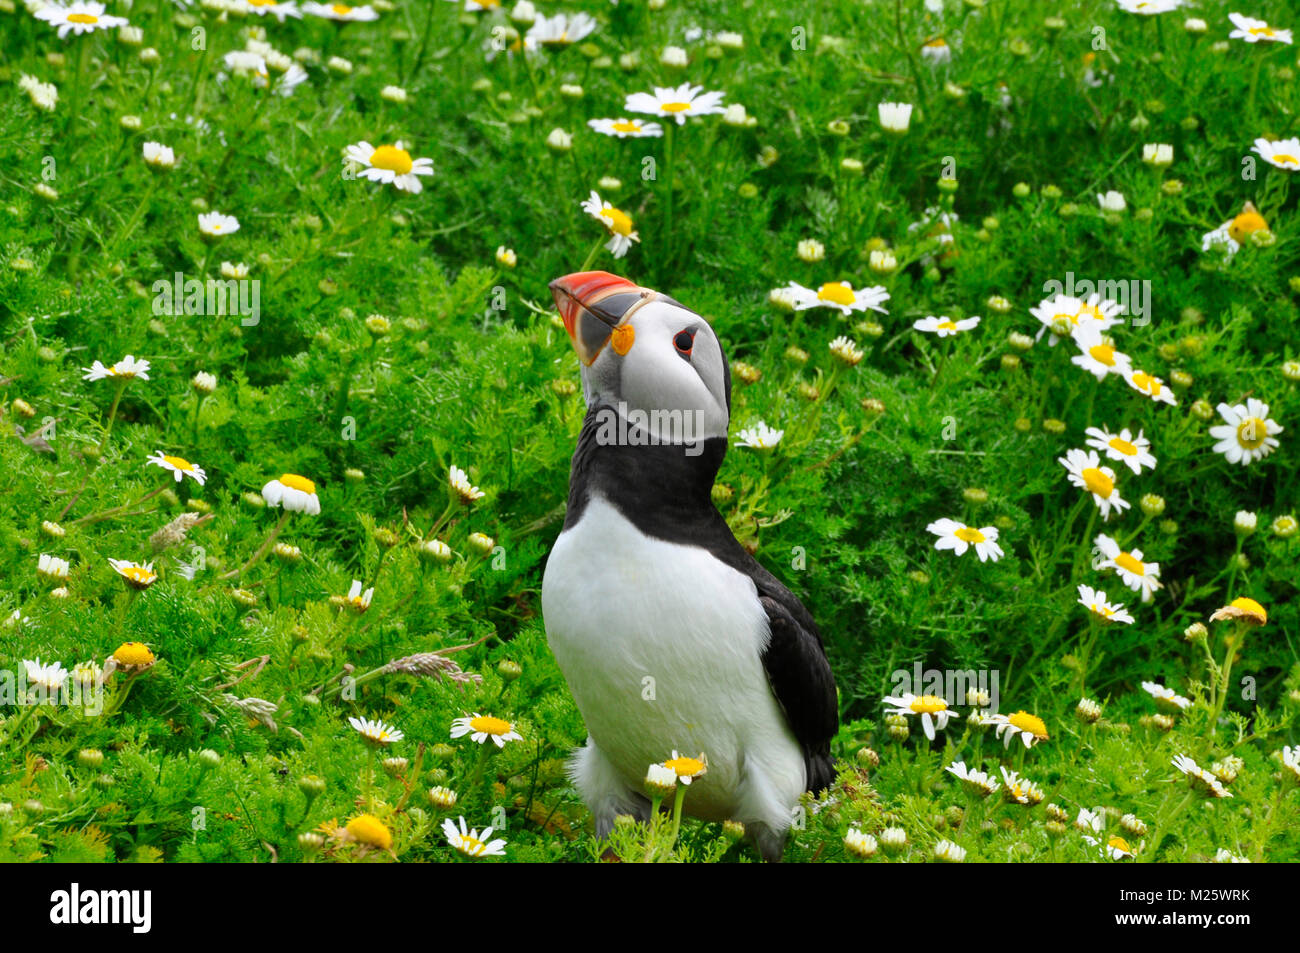 Puffin 'Fratercula arctica' looking skywards from mayweed cover arround its burrow on Skomer island off the Pembrokeshire coast.Wales,UK Stock Photo